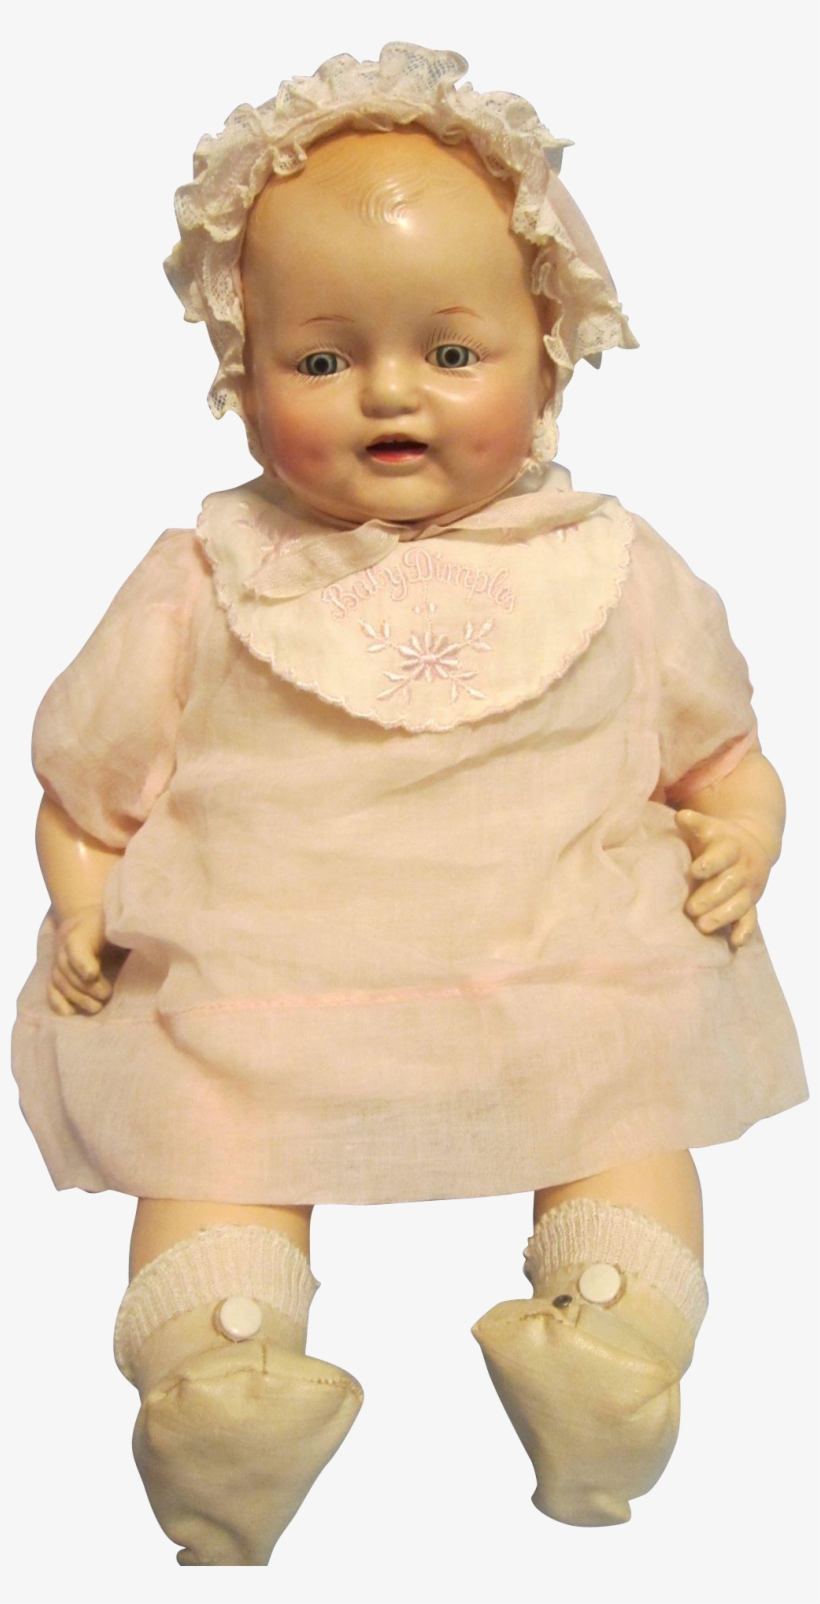 Cute Babies With Dimples - Doll, transparent png #8058702